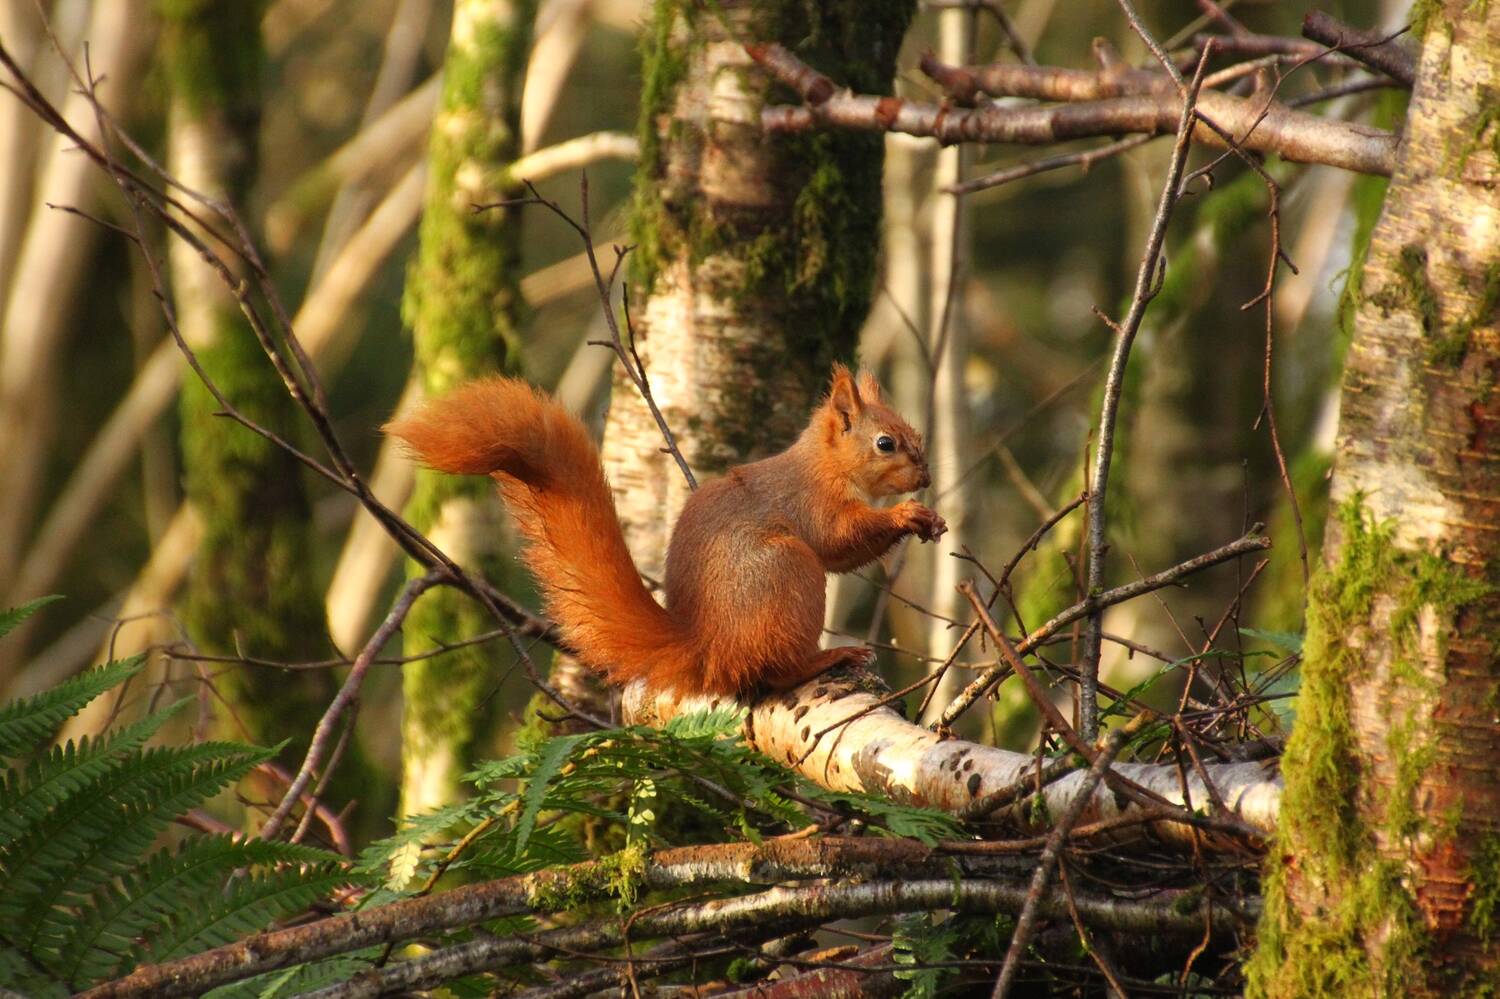 A red squirrel sits on a branch of a birch tree in woodland. It holds a nut in its front paws. Its long, red, bushy tail is held up behind it.